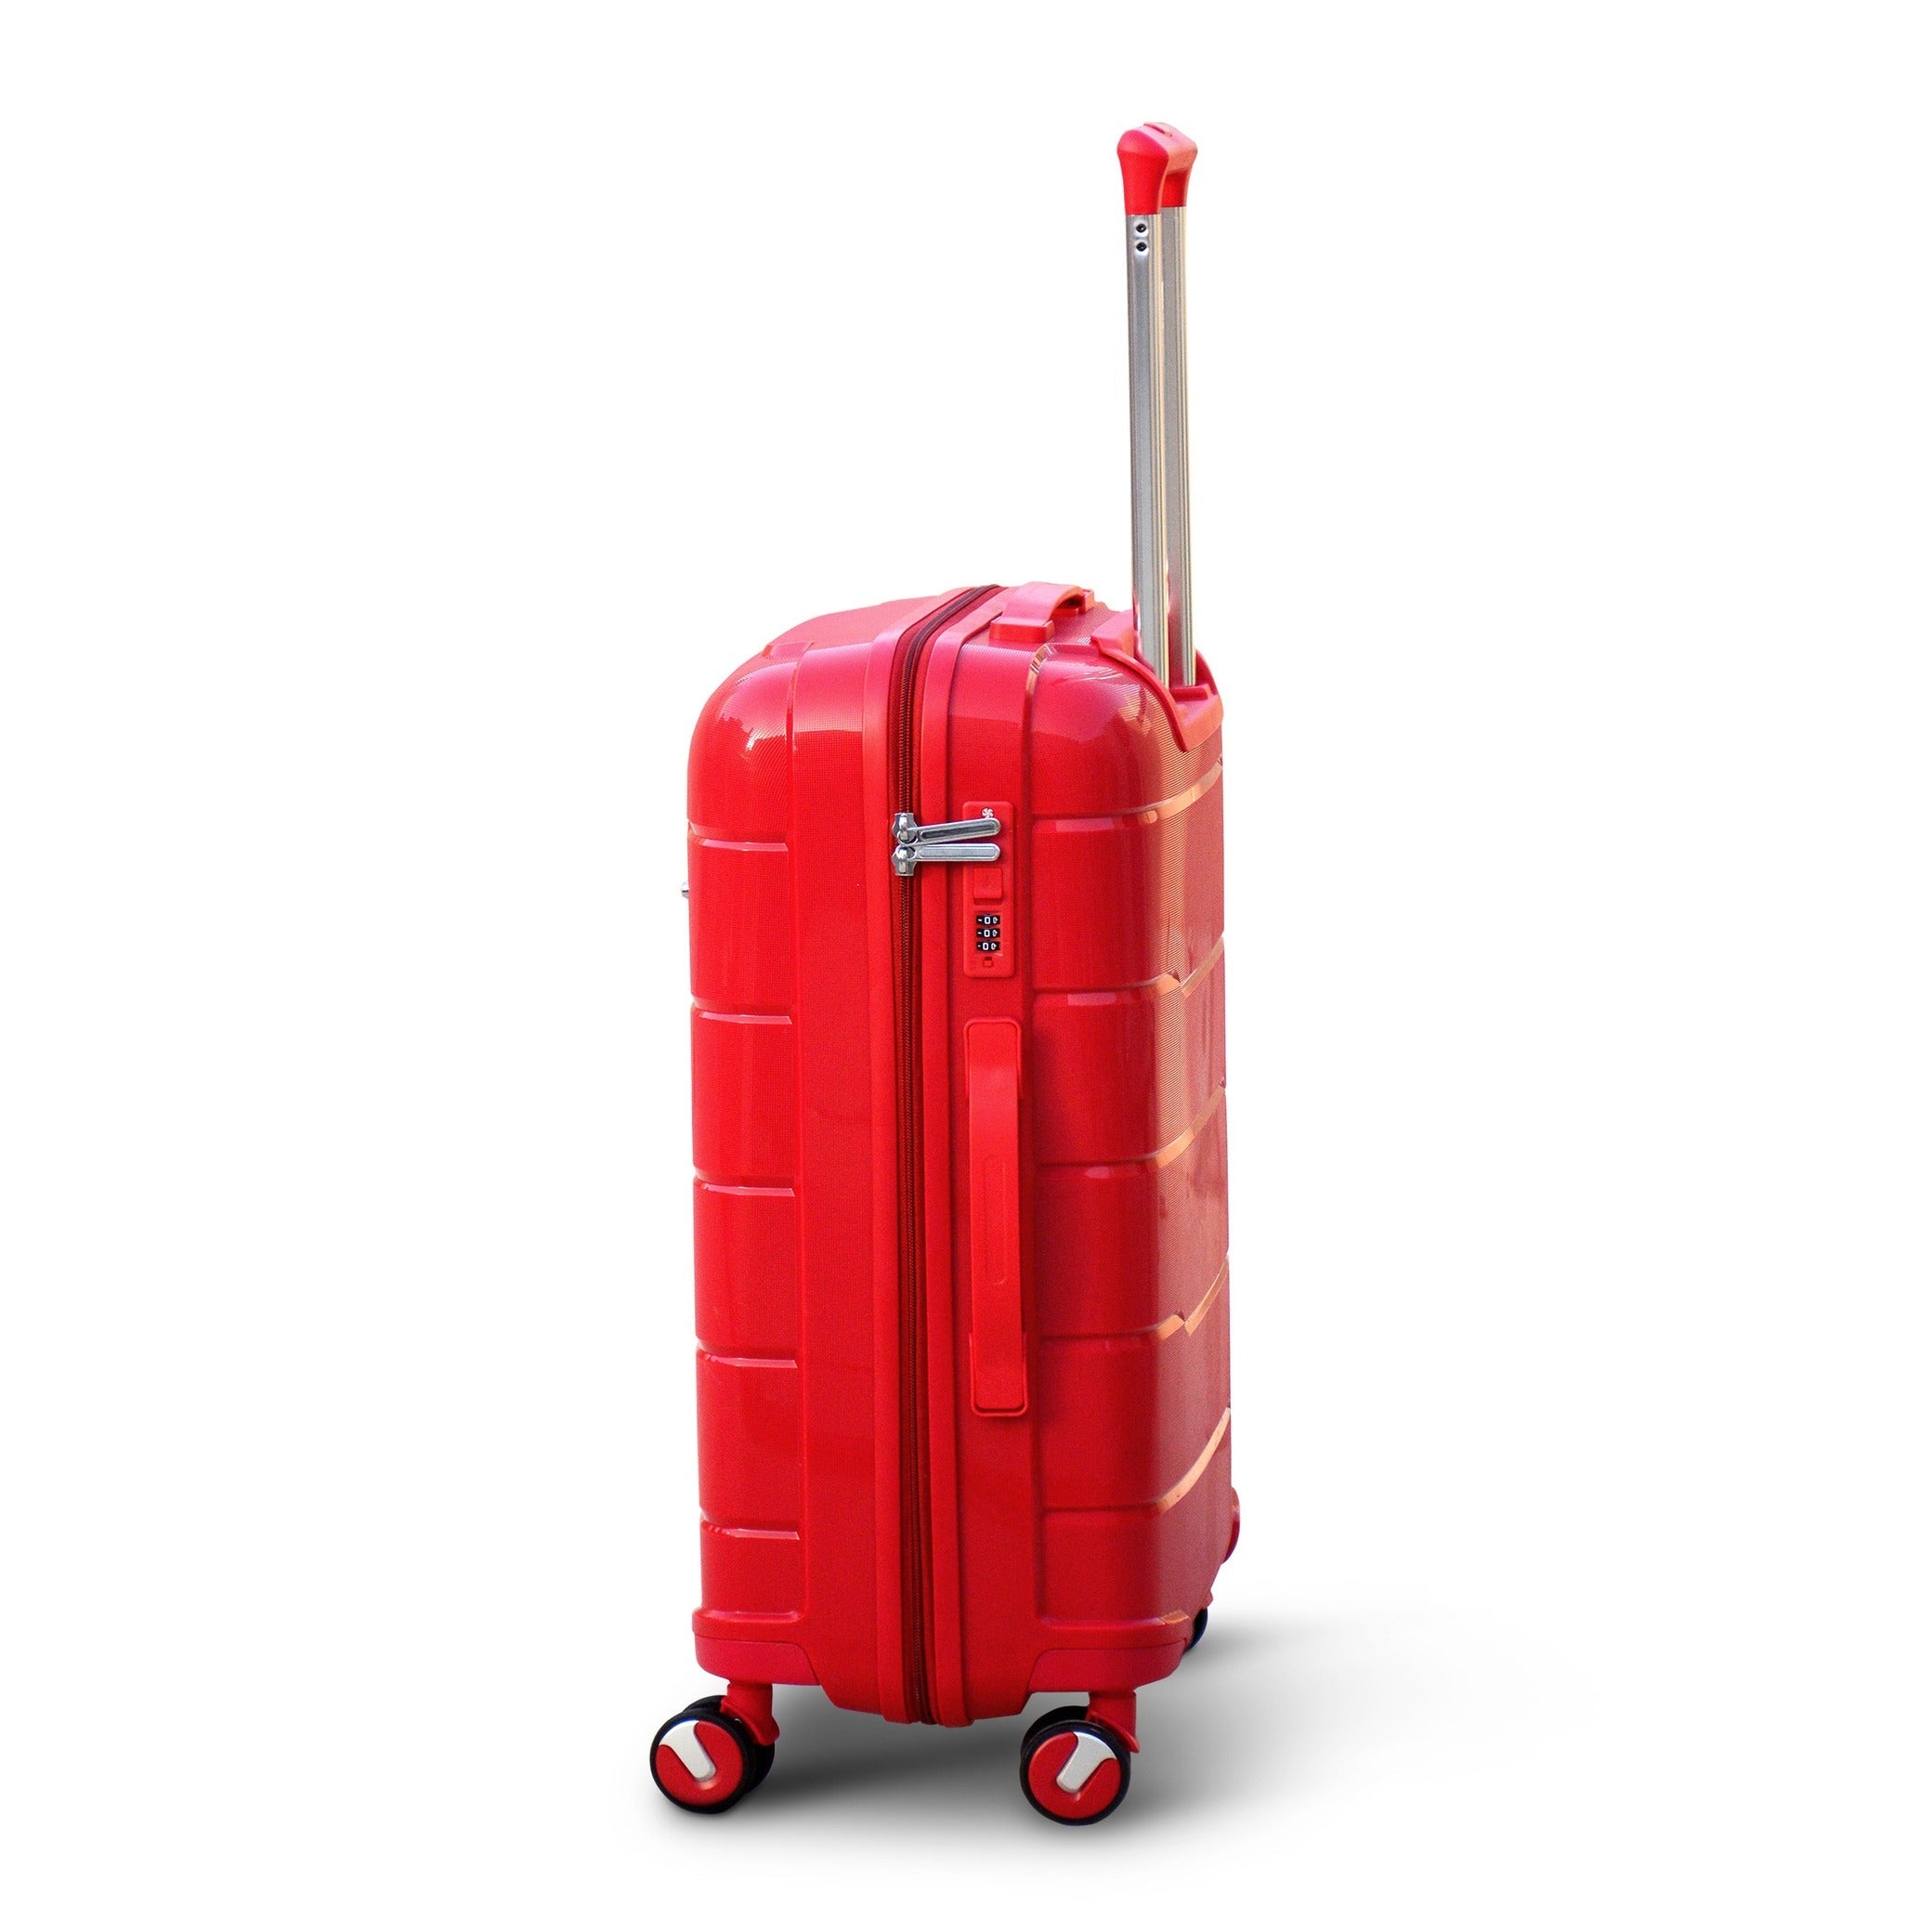 28" Red Colour Non Expandable Ceramic smooth PP Luggage Lightweight Hard Case Trolley Bag with Double Spinner Wheel